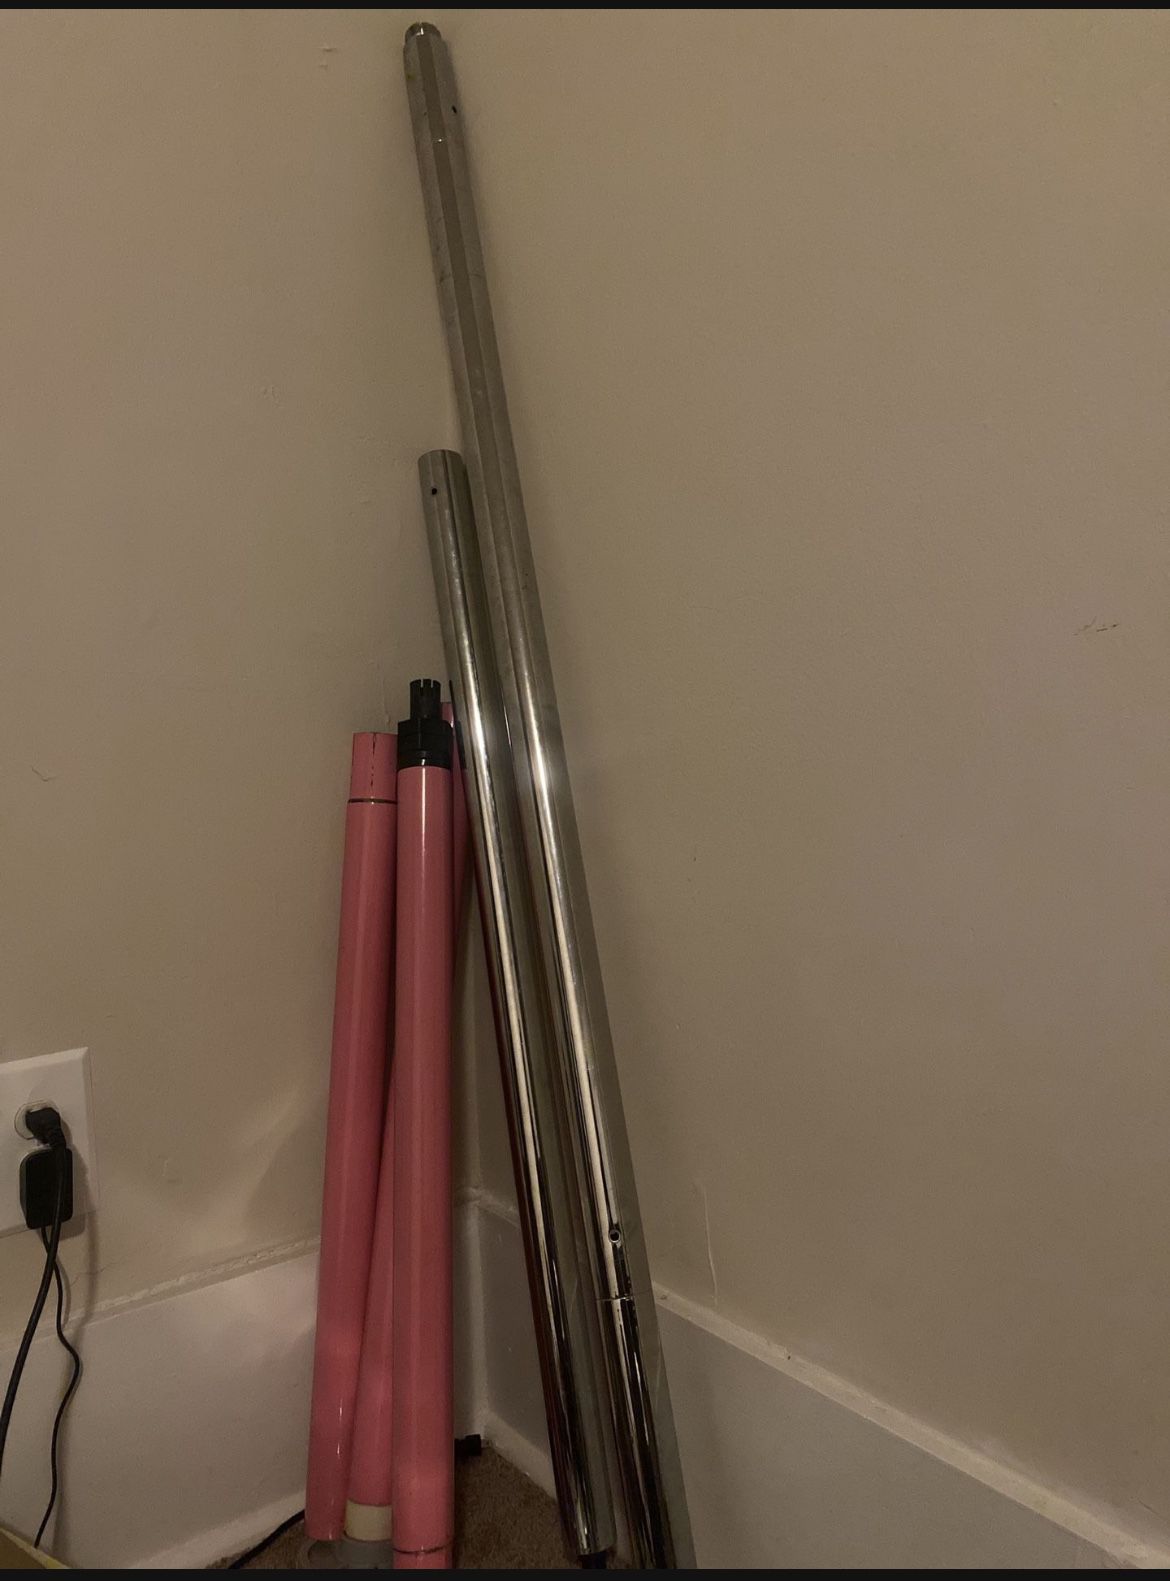 SILVER SPINNING POLE, PINK STATIC POLE